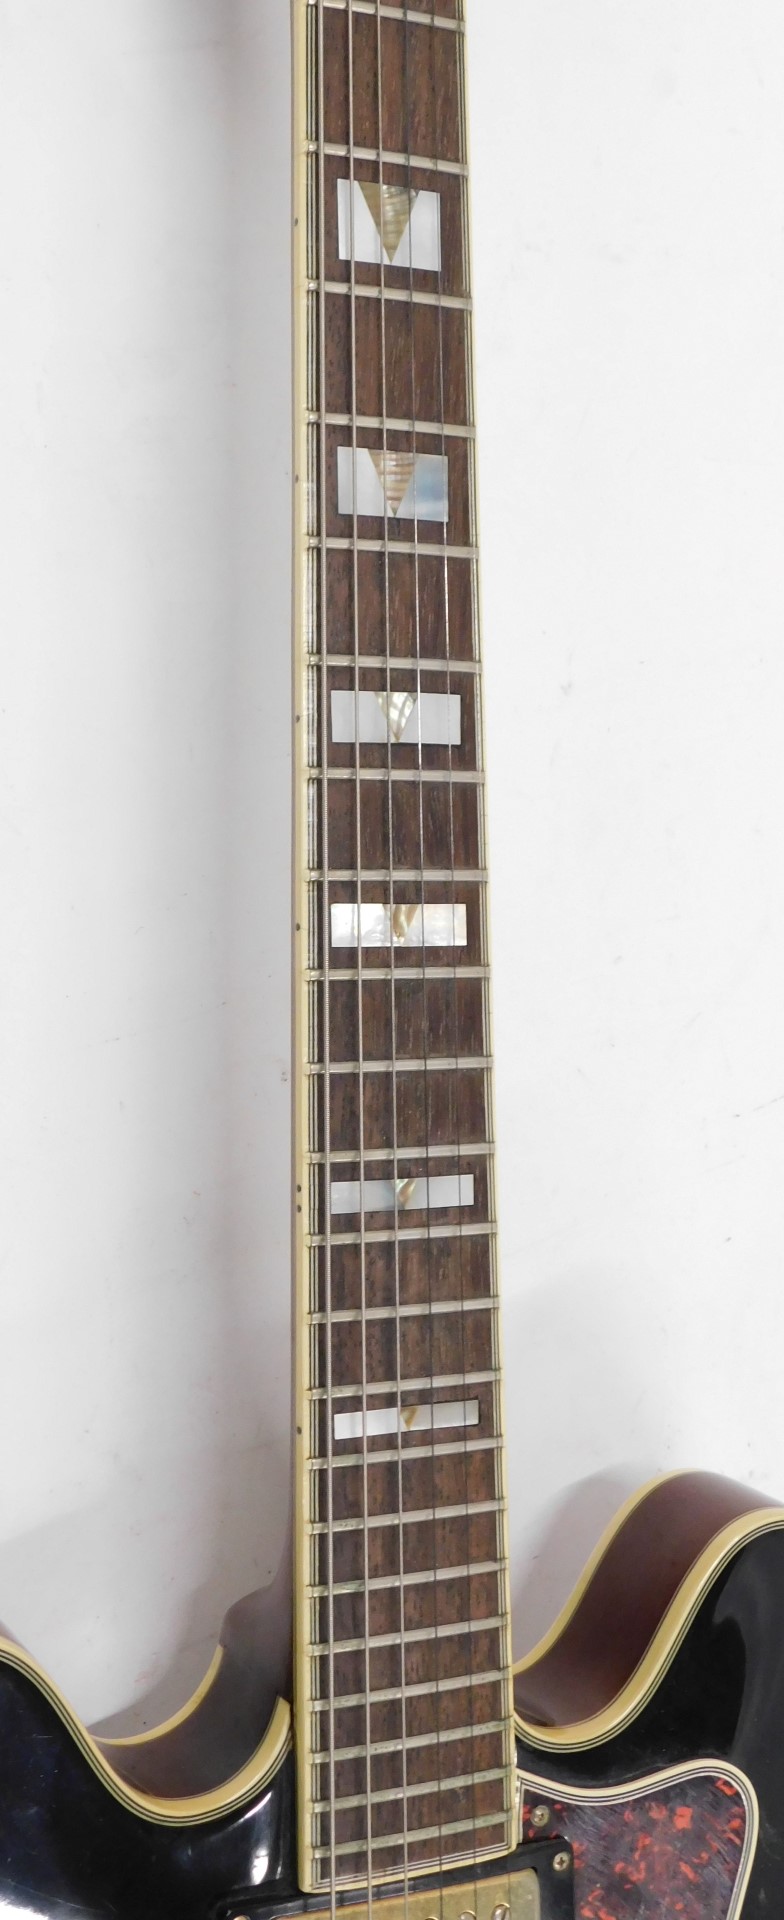 An Epiphone ES-335 electric guitar, with mother of pearl fret inlays, with padded travel case. - Image 4 of 8